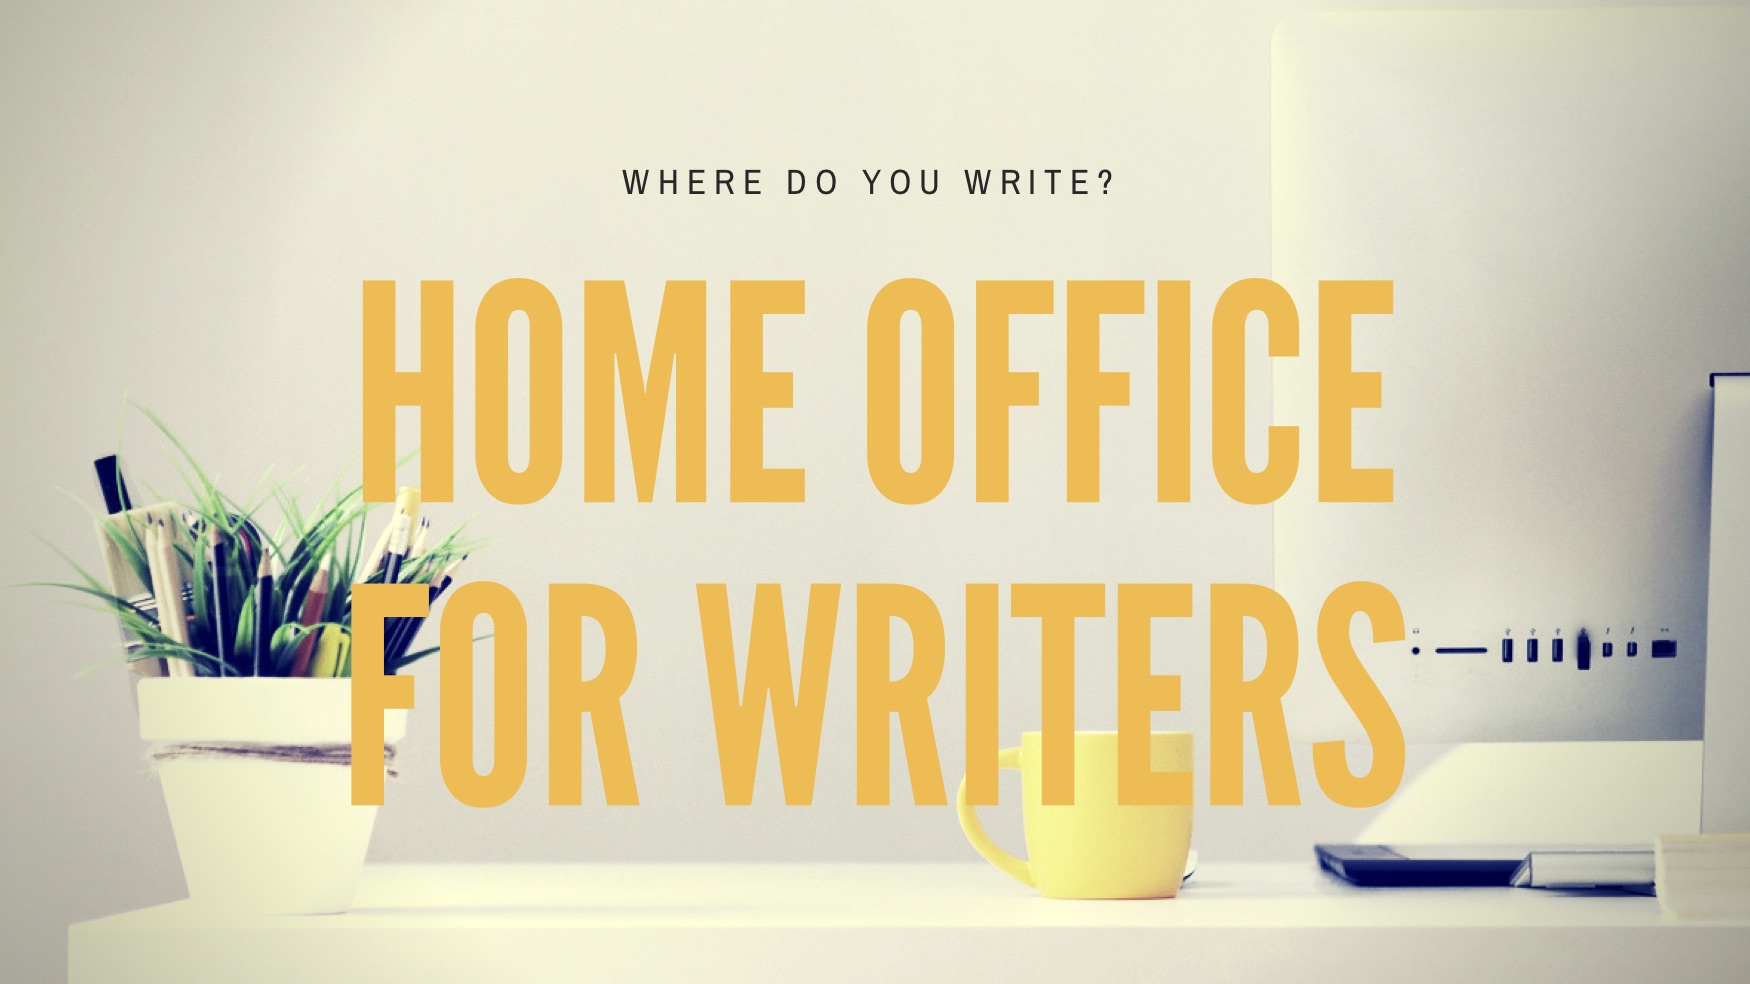 Where do you write? Home office for writers.